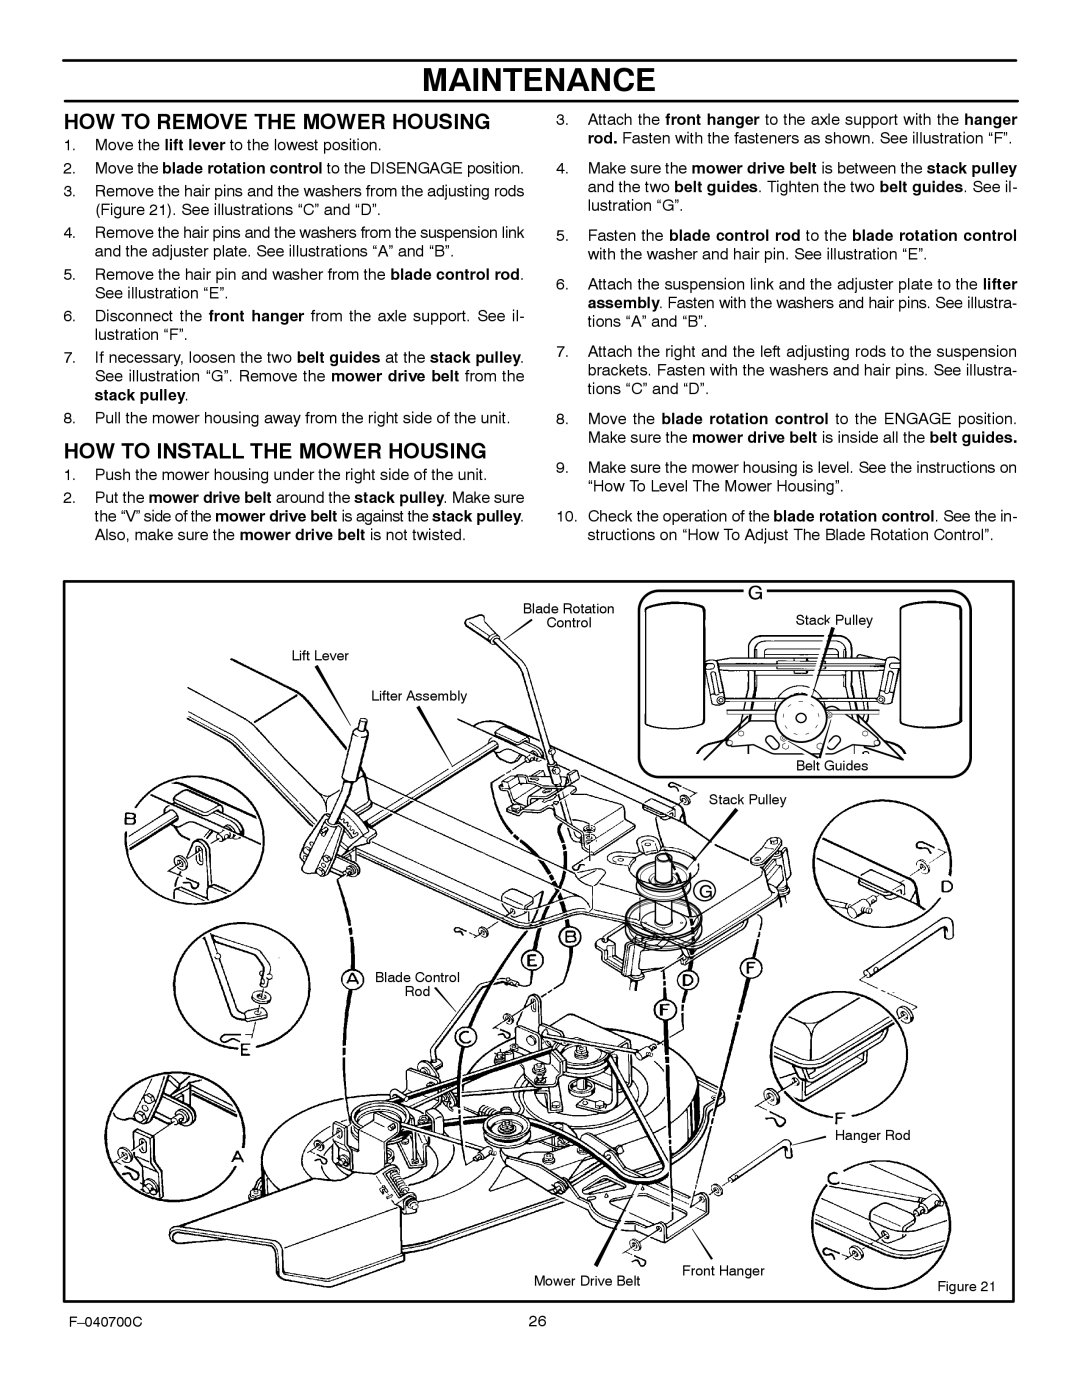 Stanley Black & Decker 387002x92NA manual HOW to Remove the Mower Housing, HOW to Install the Mower Housing 